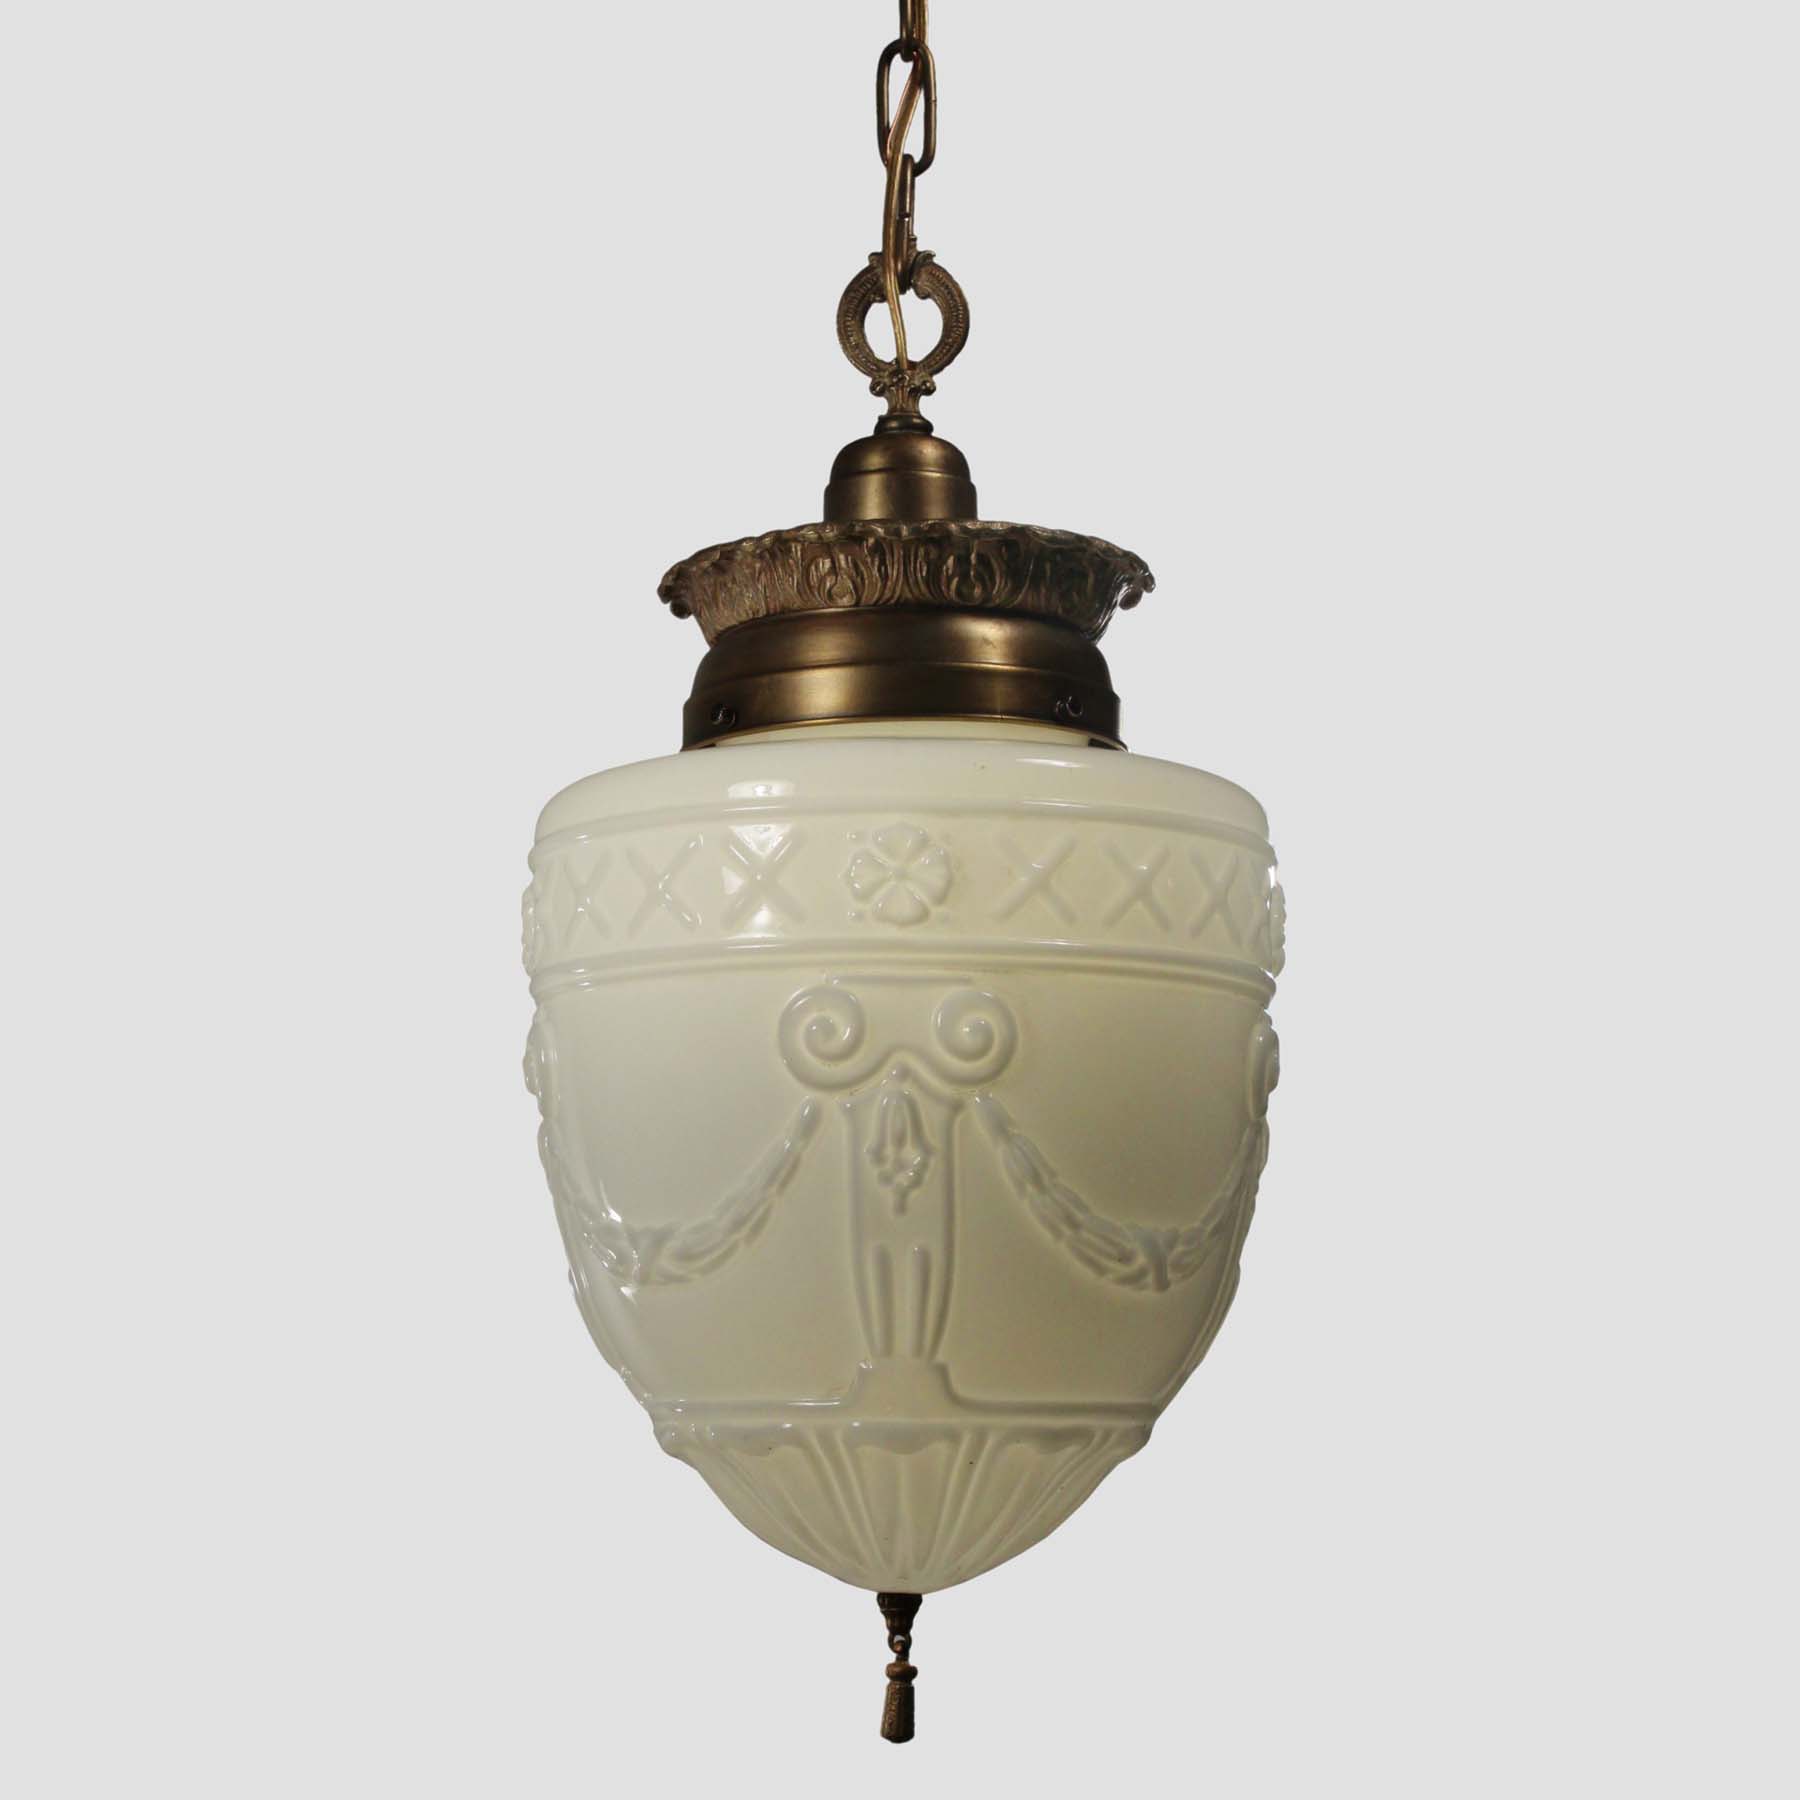 SOLD Antique Neoclassical Pendant Light with Original Shade-67321